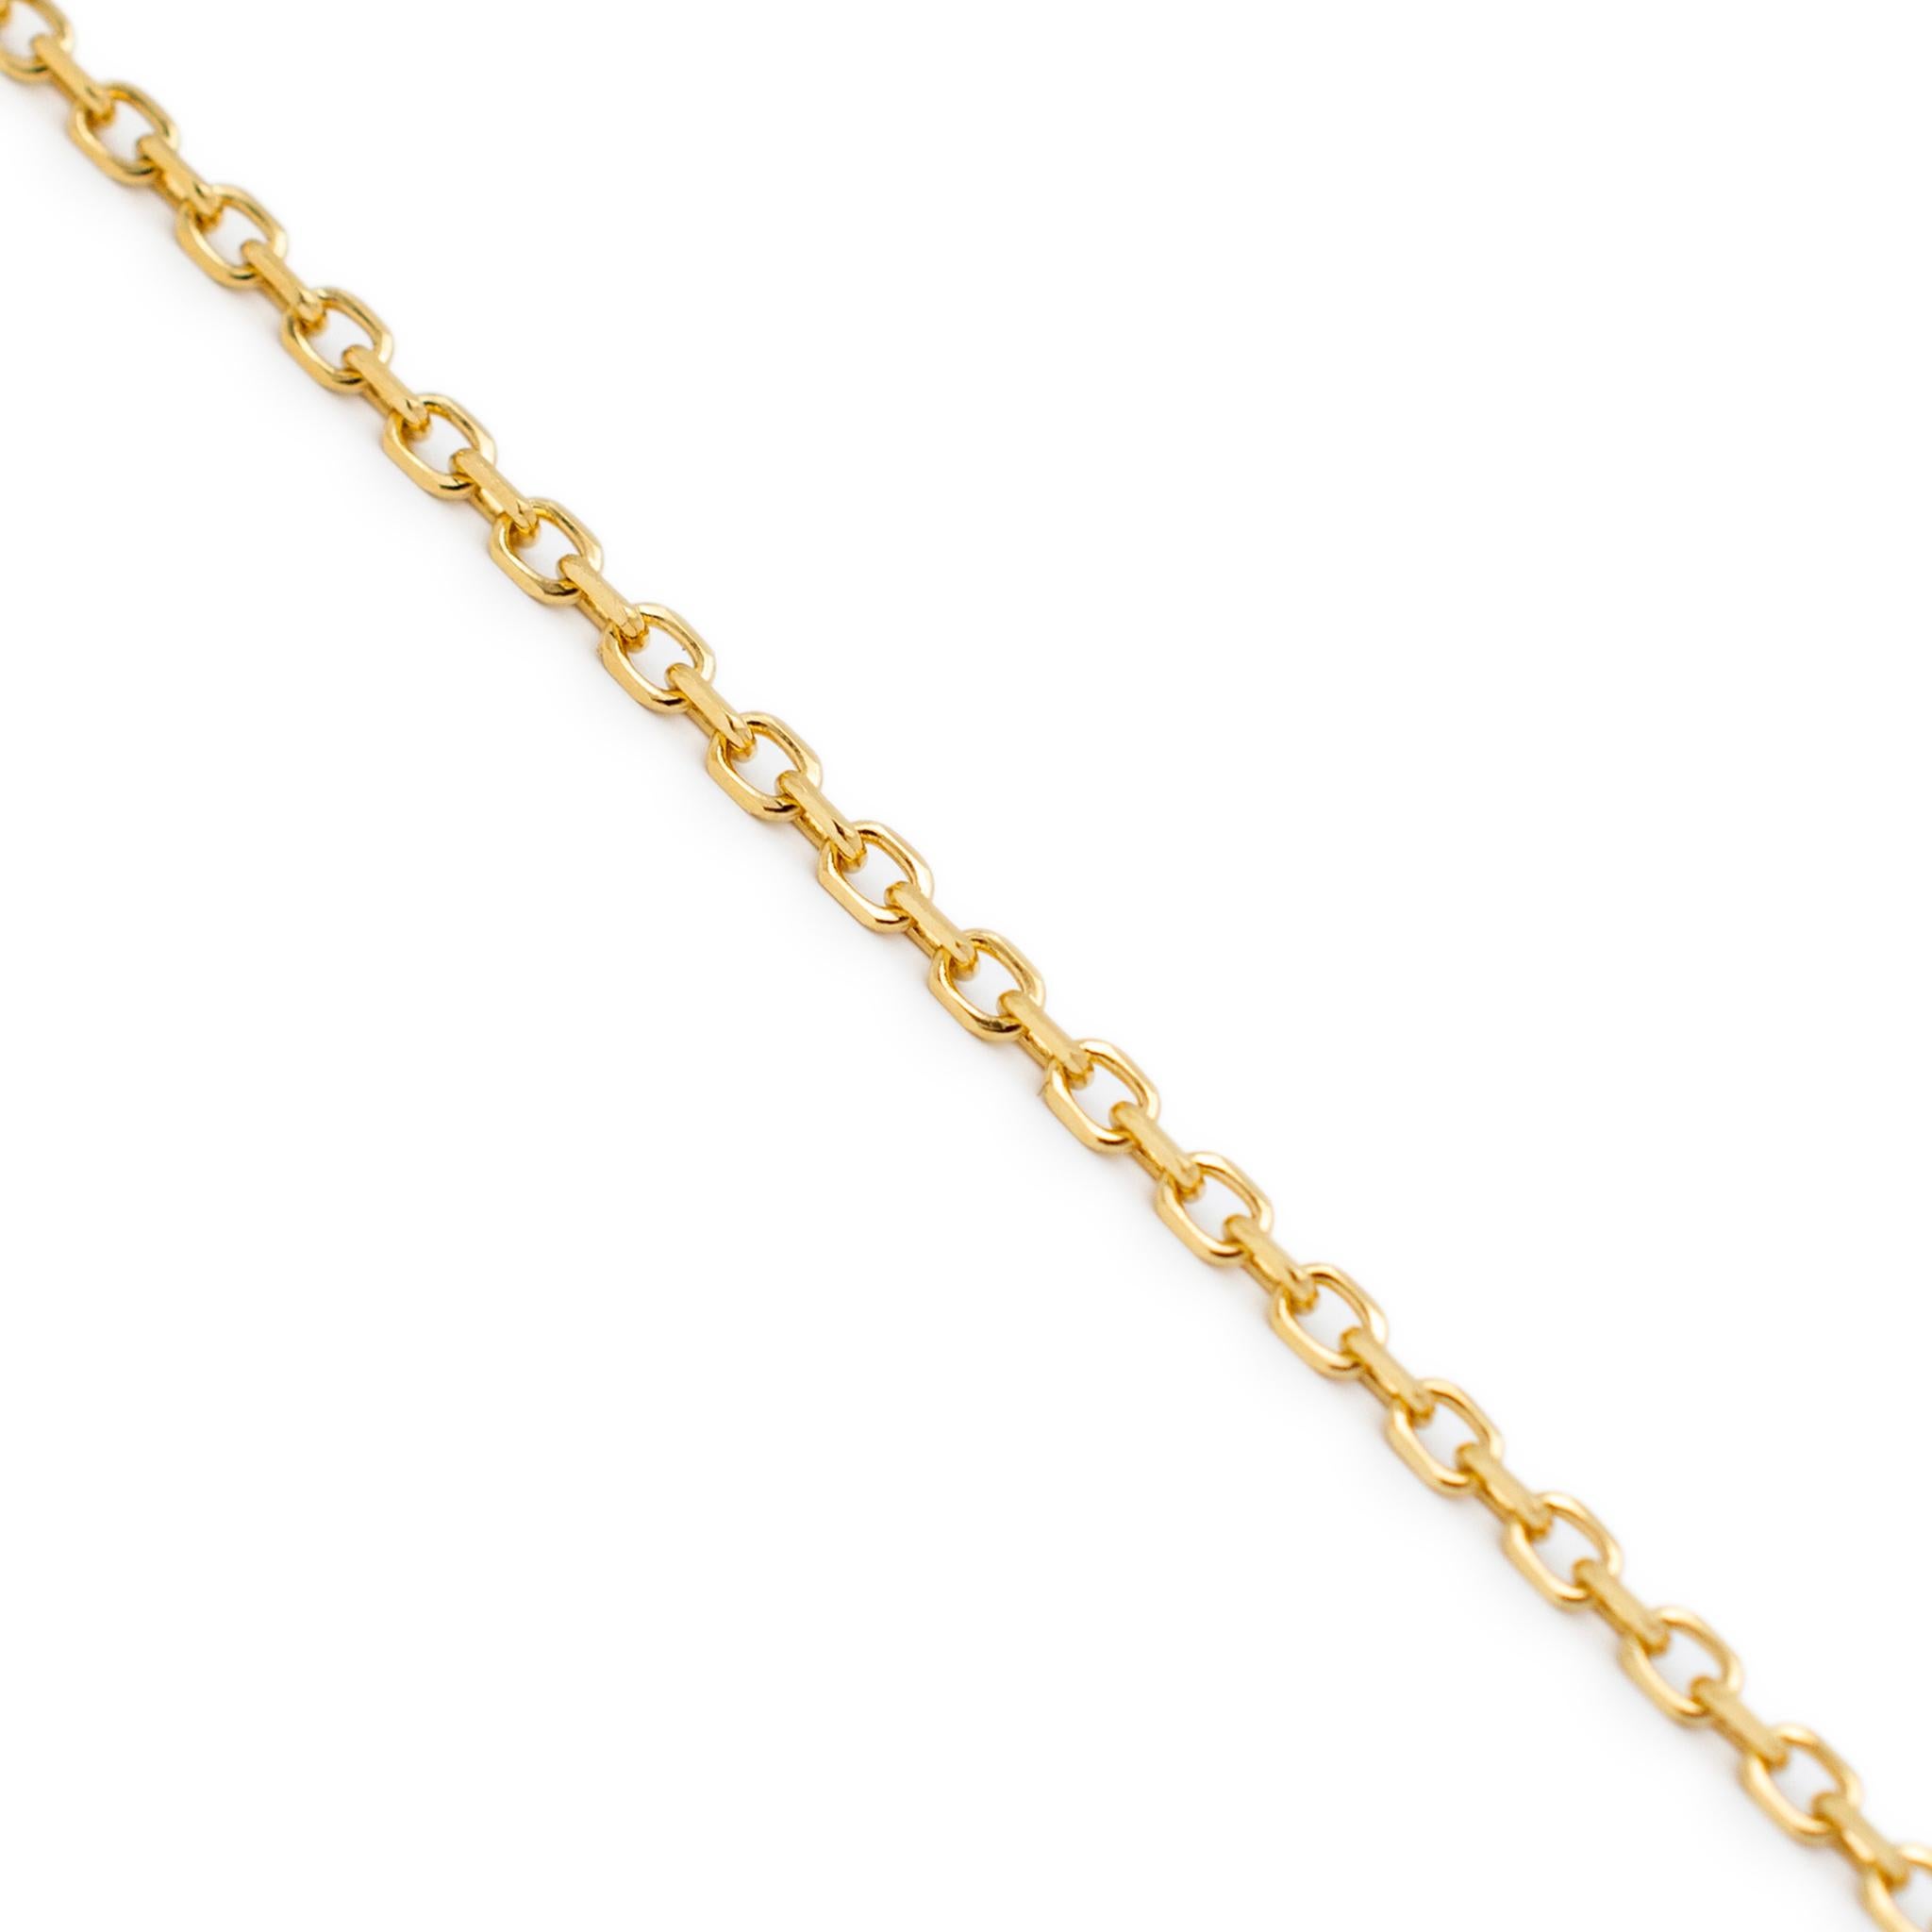 Gender: Ladies

Metal Type: 14K Yellow Gold

Length: 18.00 inches

Width: 1.30 mm

Weight: 3.78 grams

14K Yellow Gold cable link chain. Engraved with 